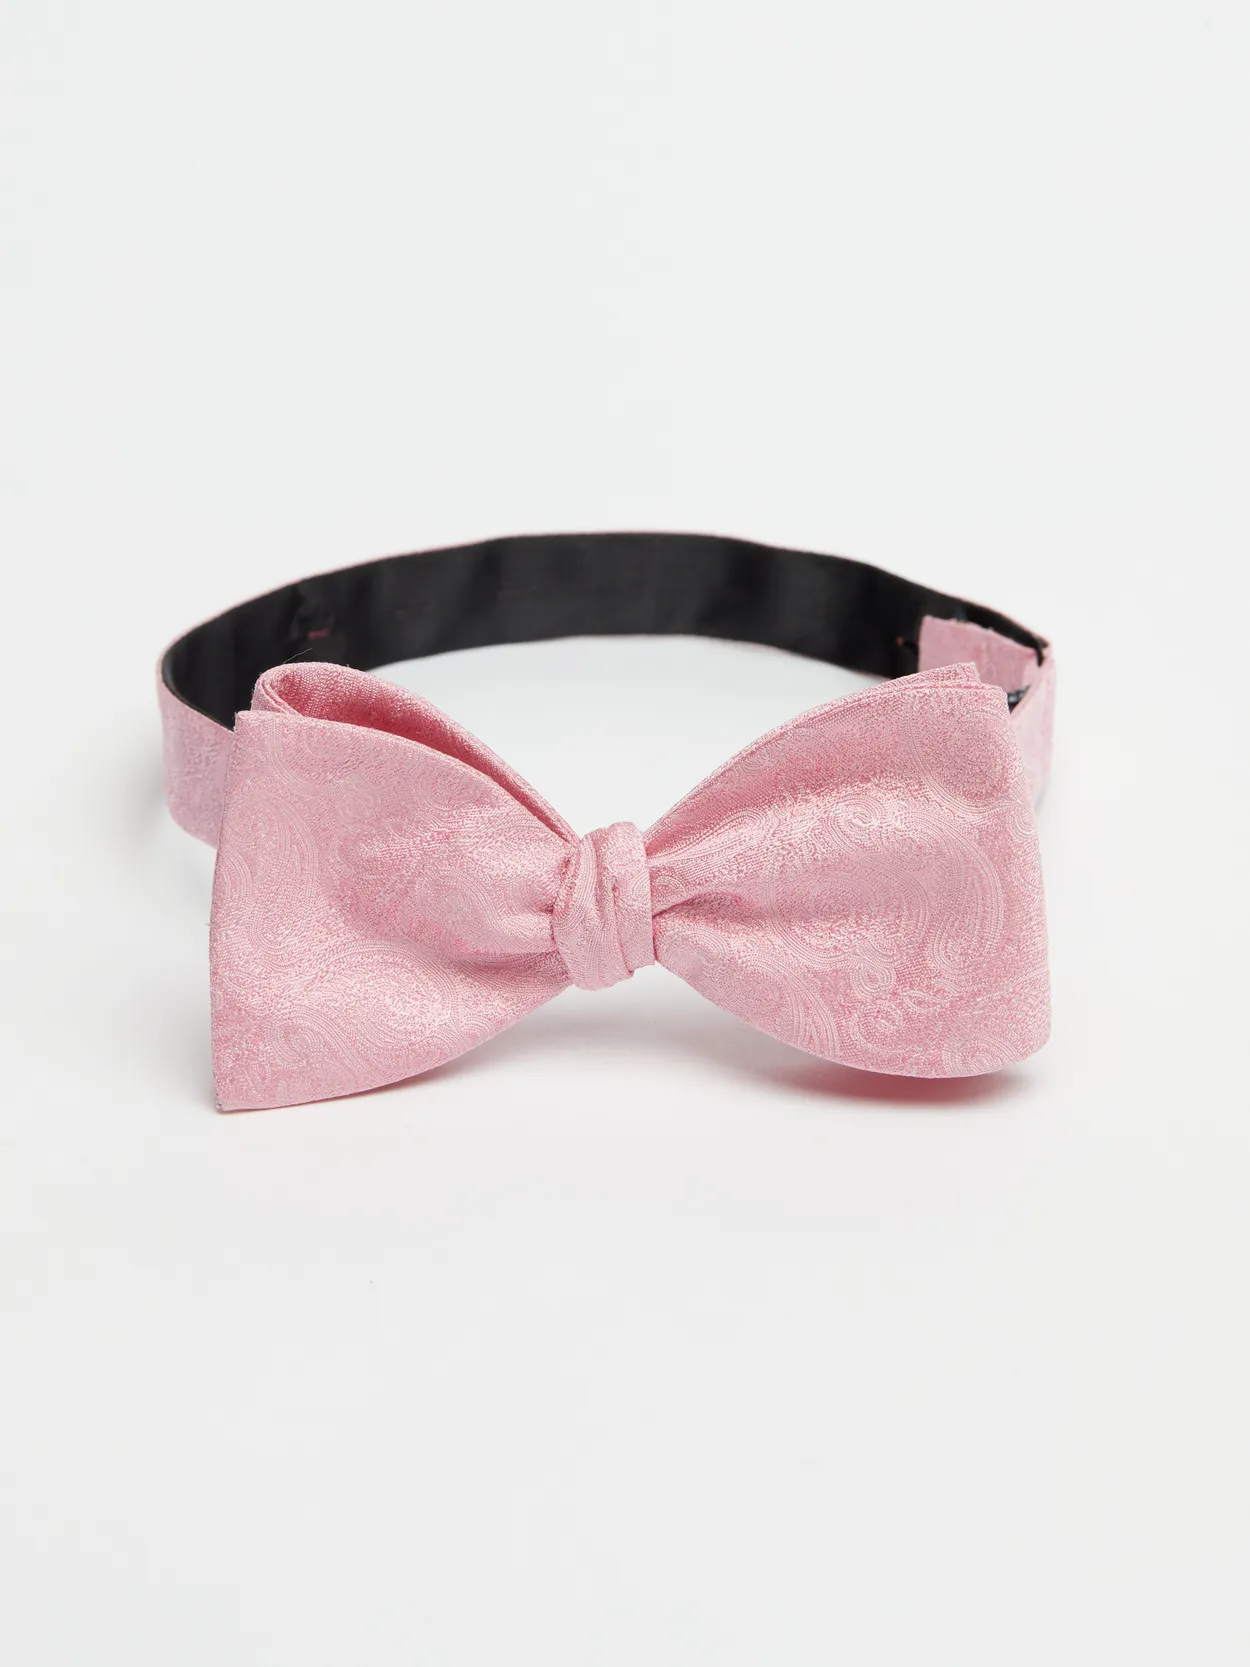 Pink Bow Tie Formal